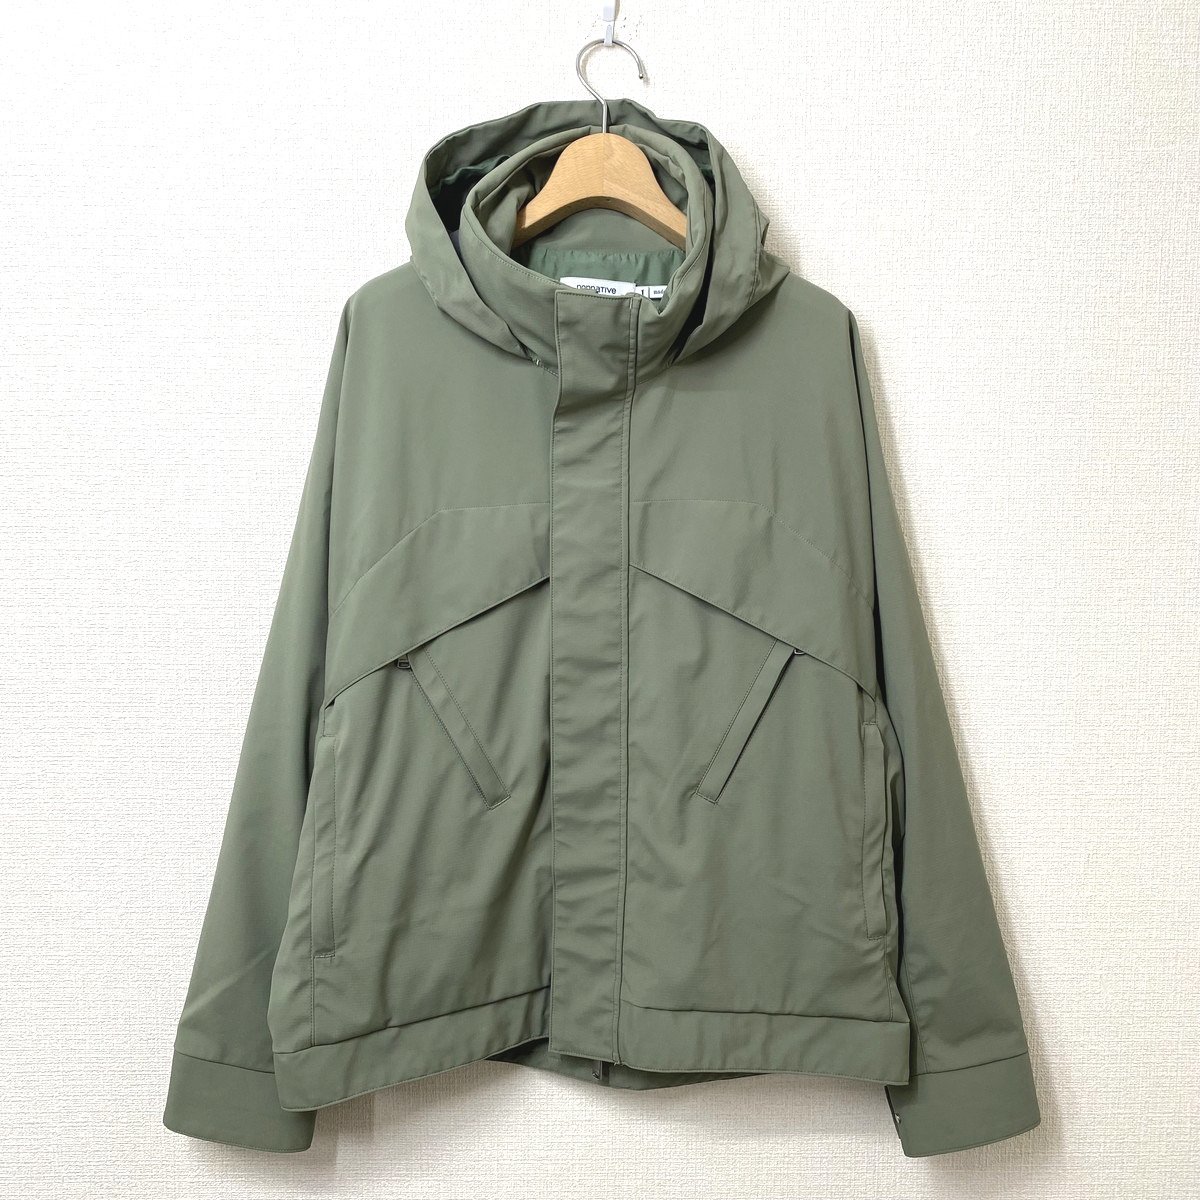 【22SS 定価7.9万円】nonnative ノンネイティブ STROLLER BLOUSON N/P RIPSTOP STRETCH WITH GORE-TEX INFINIUM ブルゾン 1 カーキ